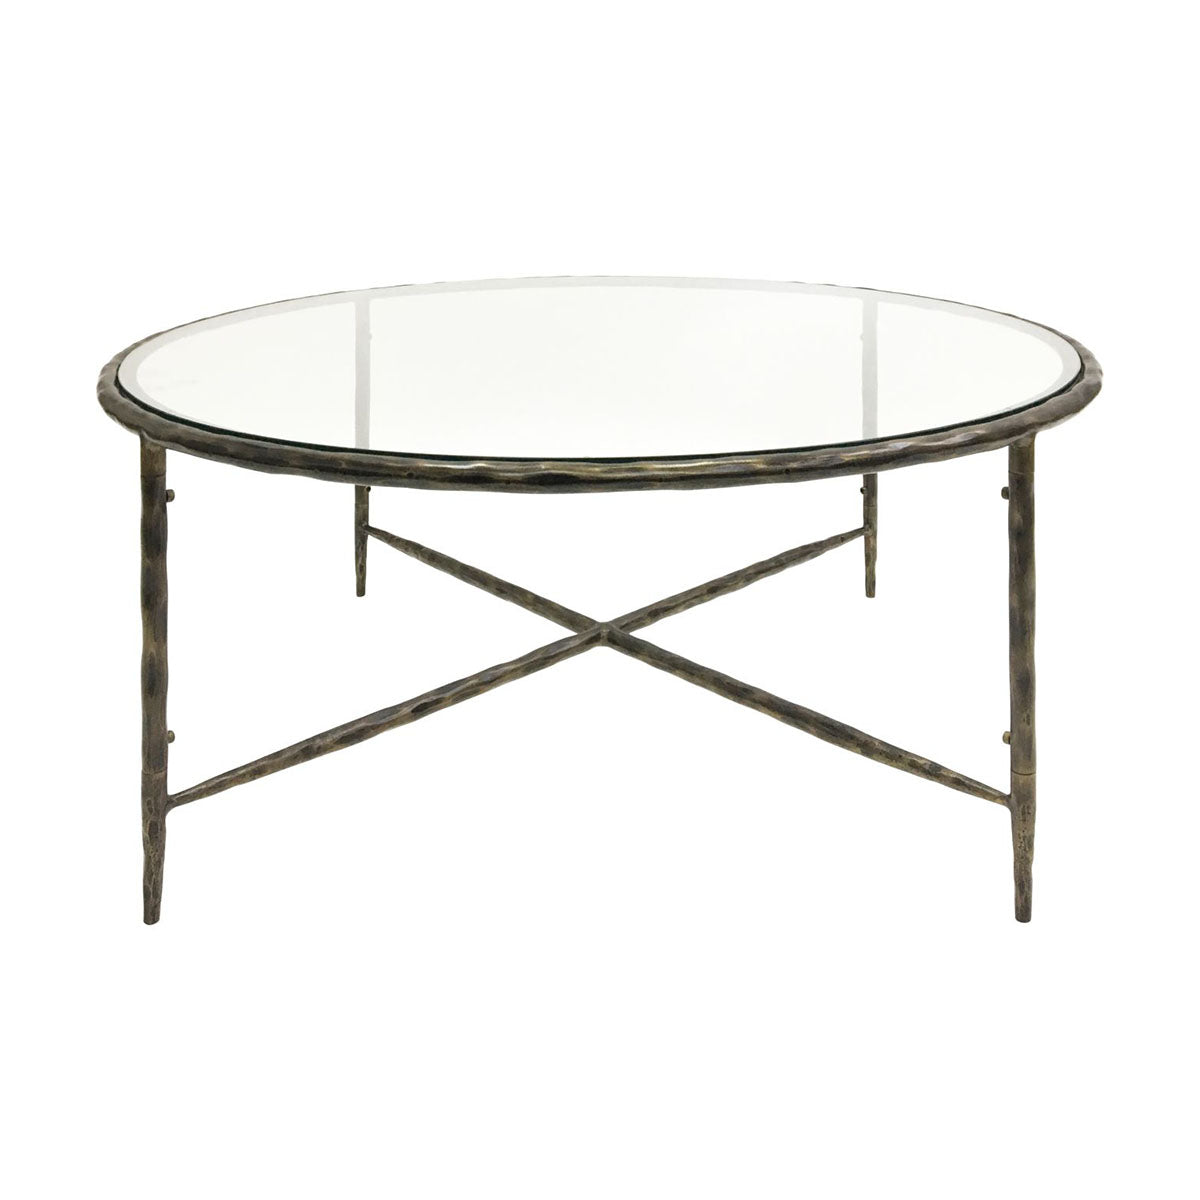 Patterdale Hand Forged Round Coffee Table Dark Bronze Finish with Glass Top